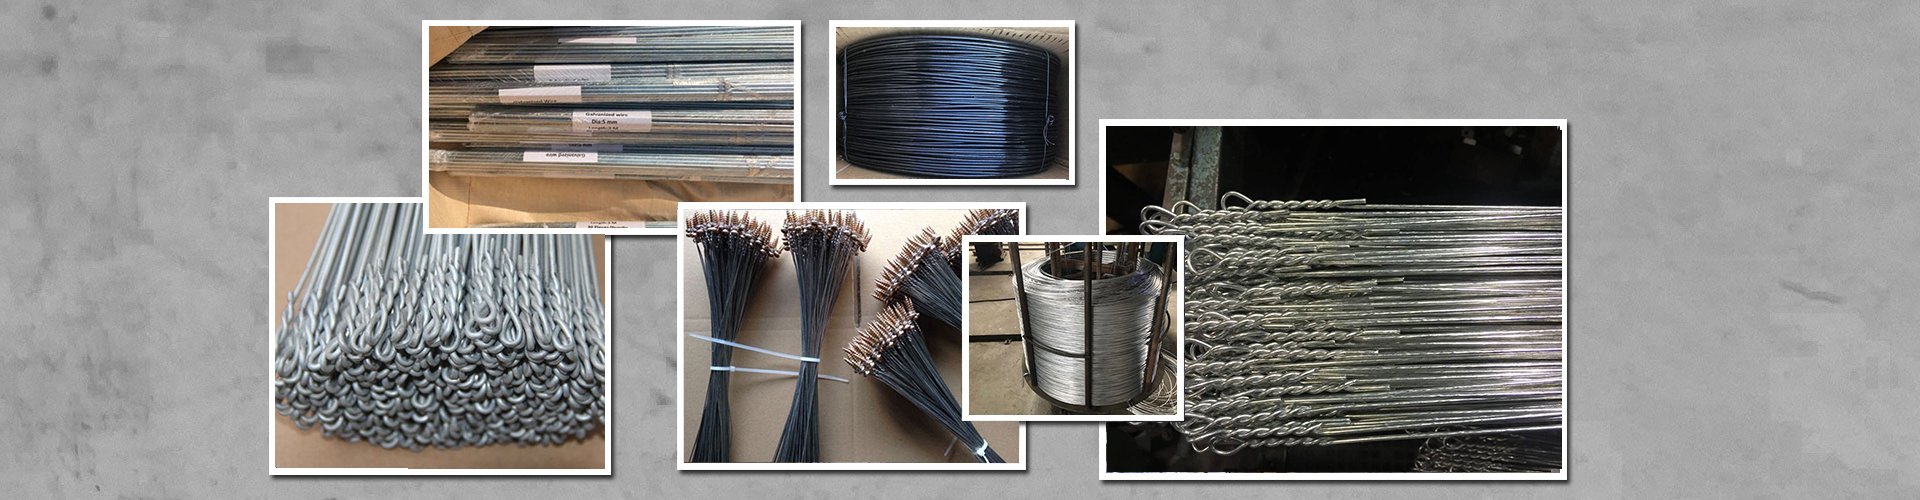 Baling Wire,Wedge Wire Screen,Filter Mesh